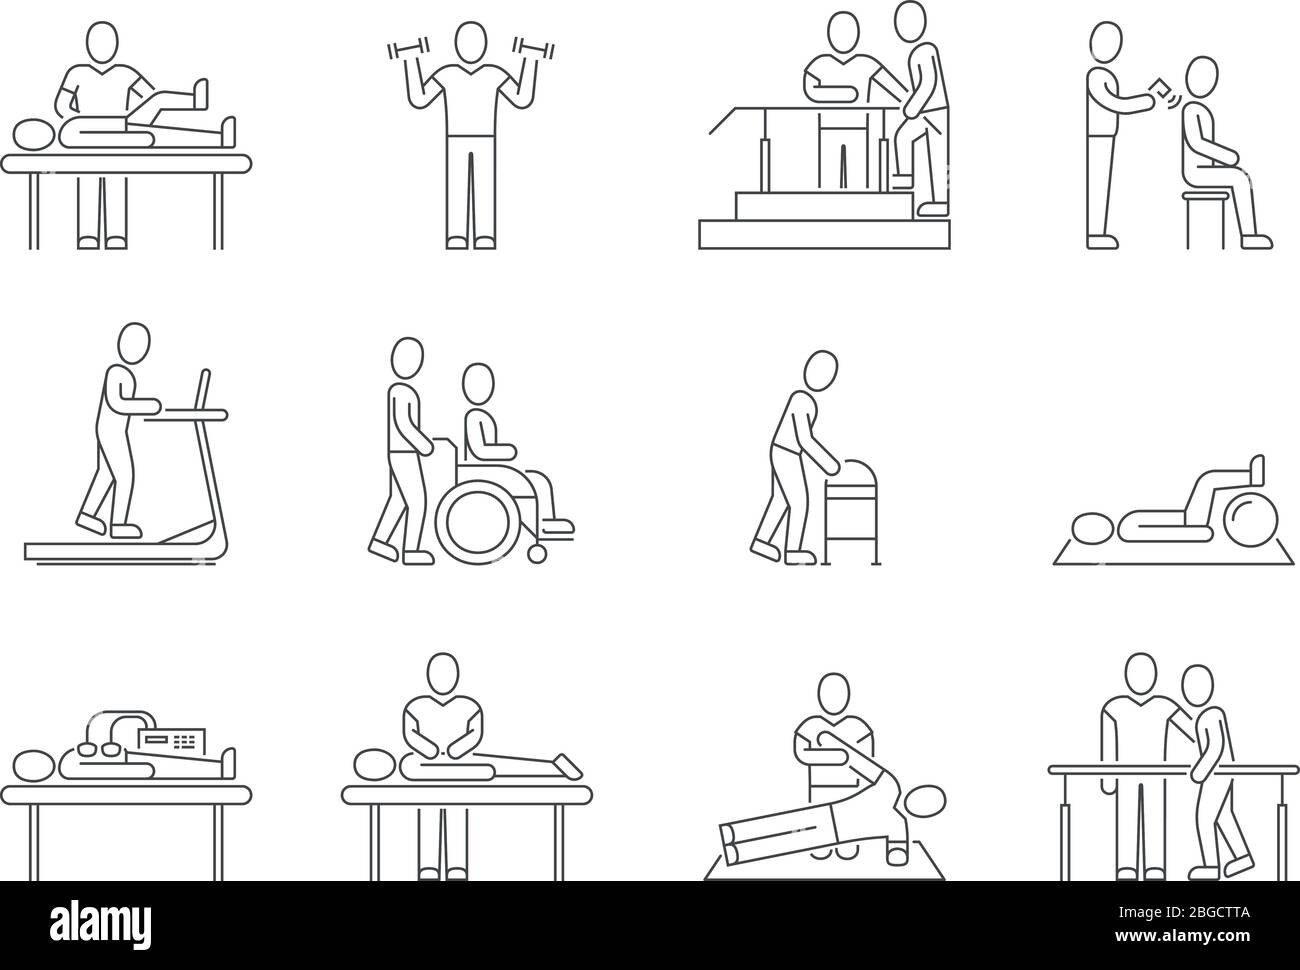 Physiotherapy and rehabilitation, exercises and massage therapy vector line medical icons. Medical patient, physical therapy exercise illustration Stock Vector